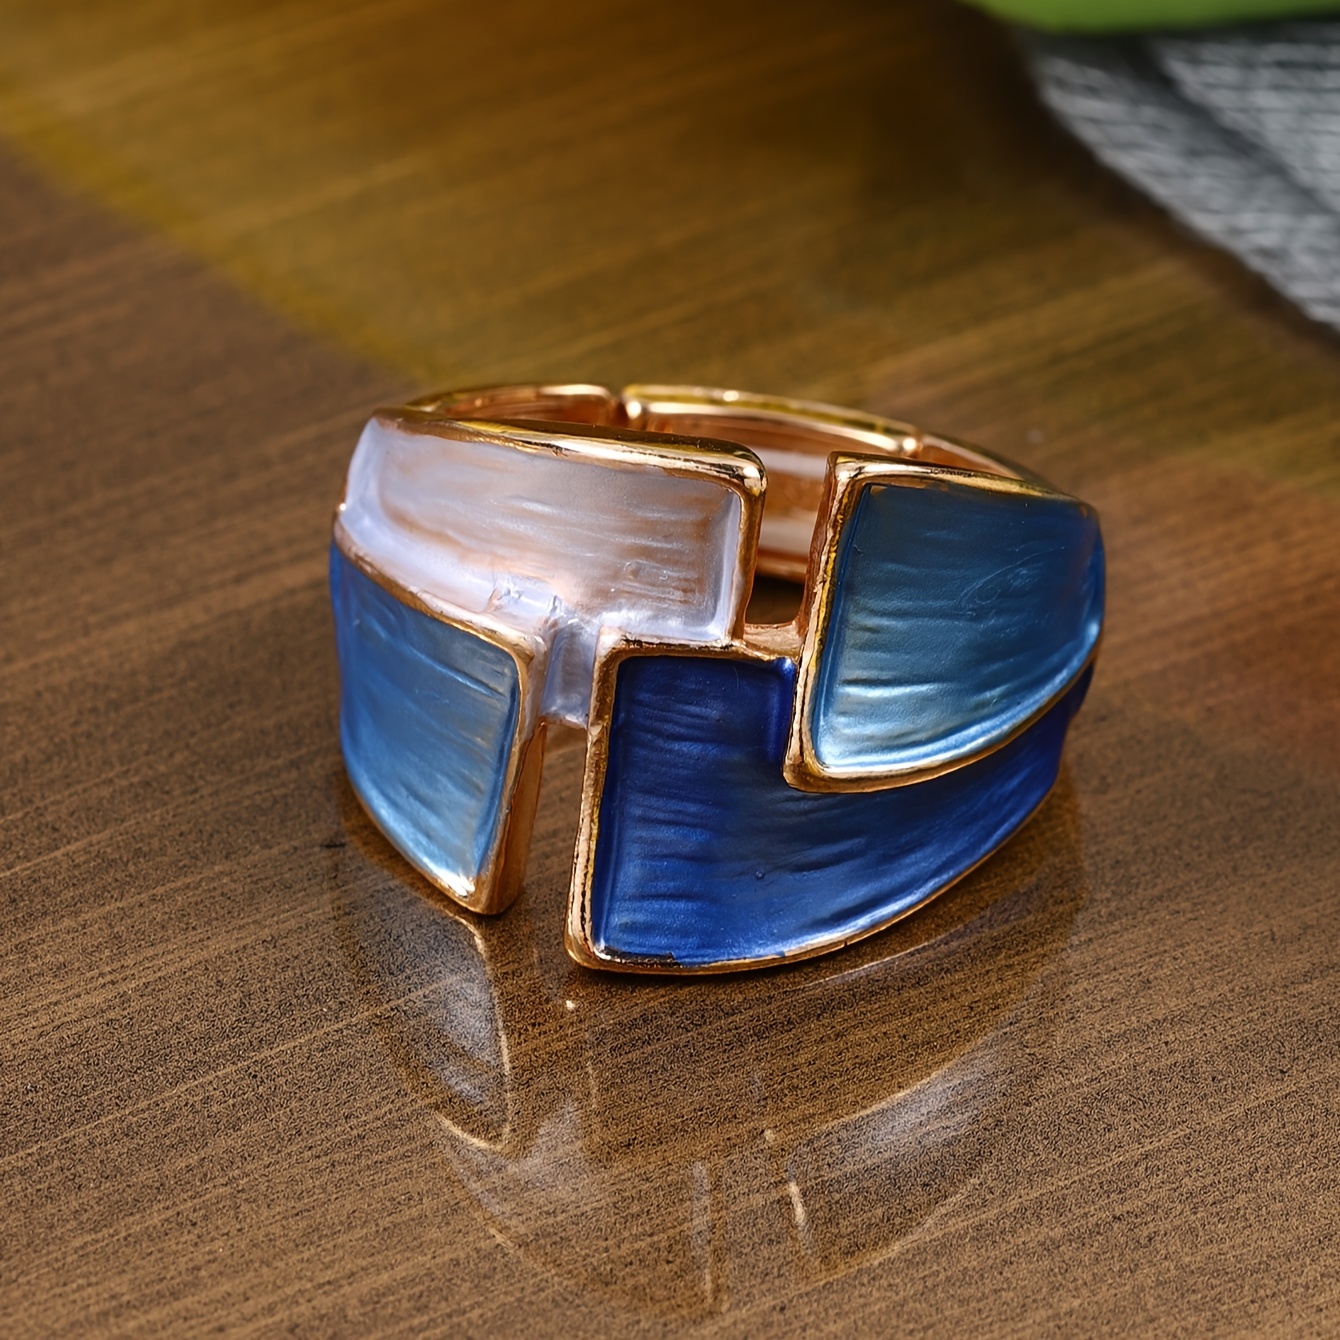 

1pc Vintage French Style Geometric Ring, Elegant Blue Enamel Ring Jewelry, Romantic Accessory For Women, Birthday Or Holiday Gift